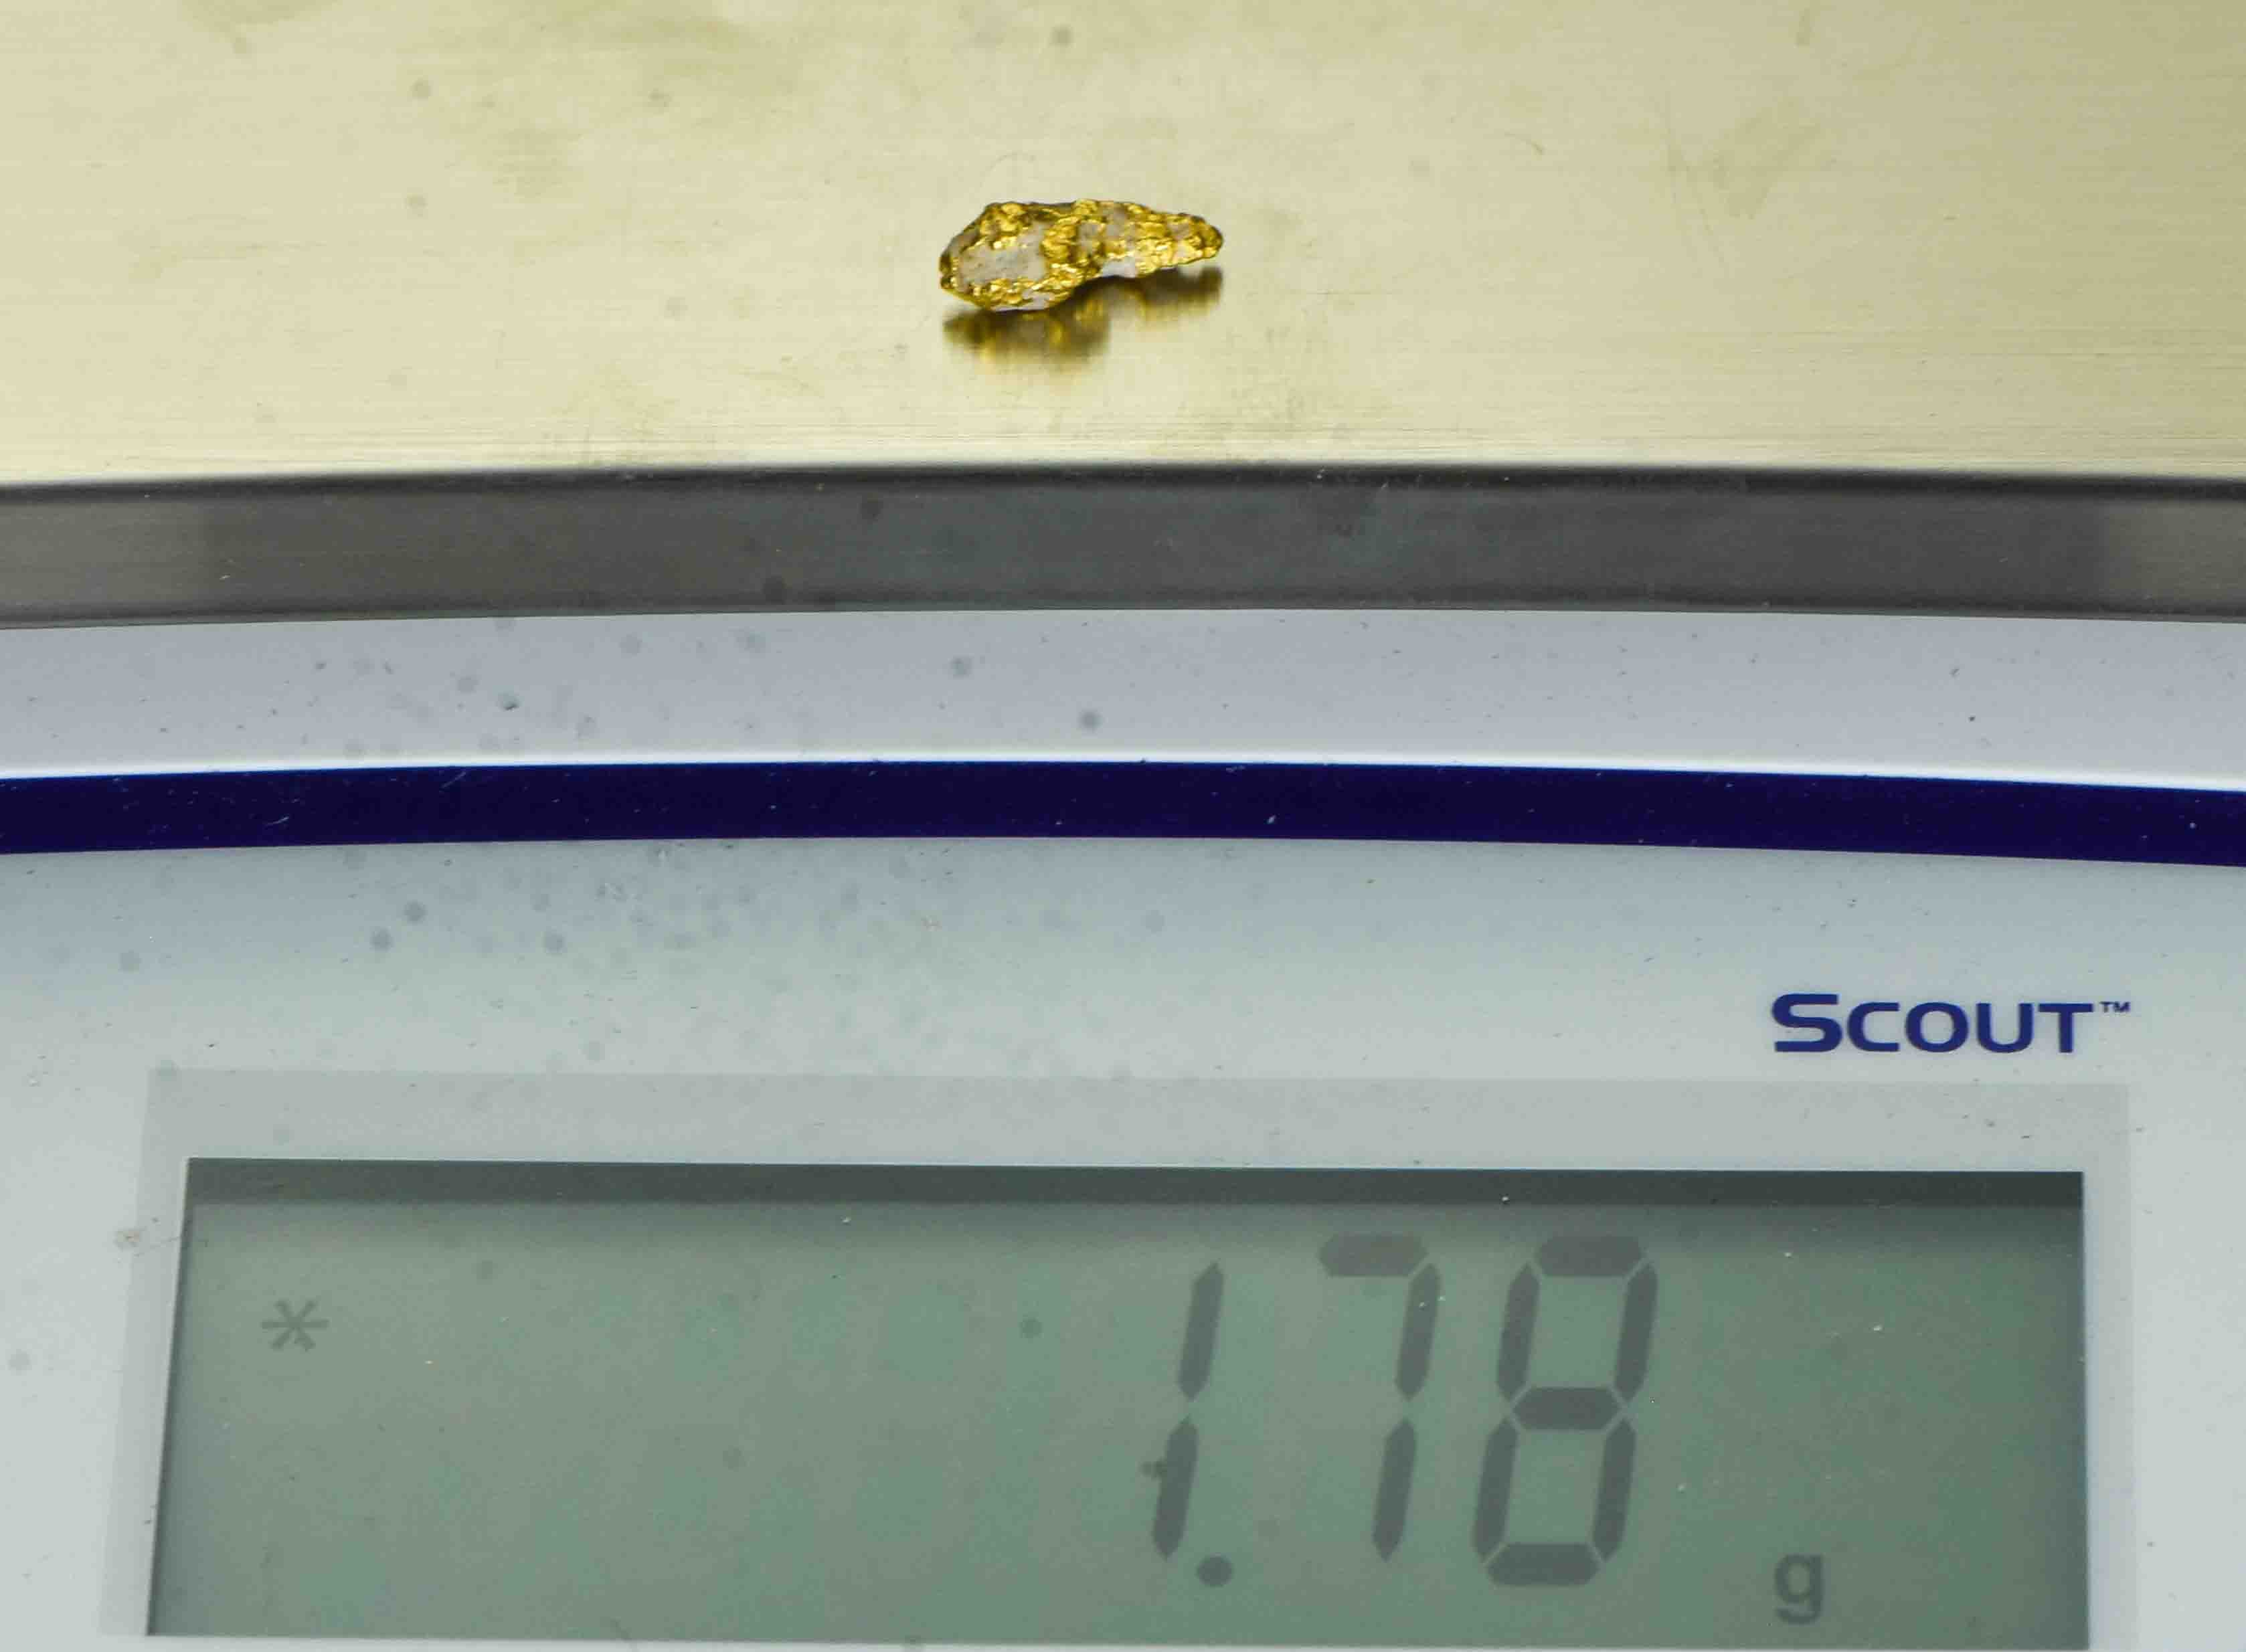 #35 Australian Natural Gold Nugget With Quartz Weighs 1.78 Grams.